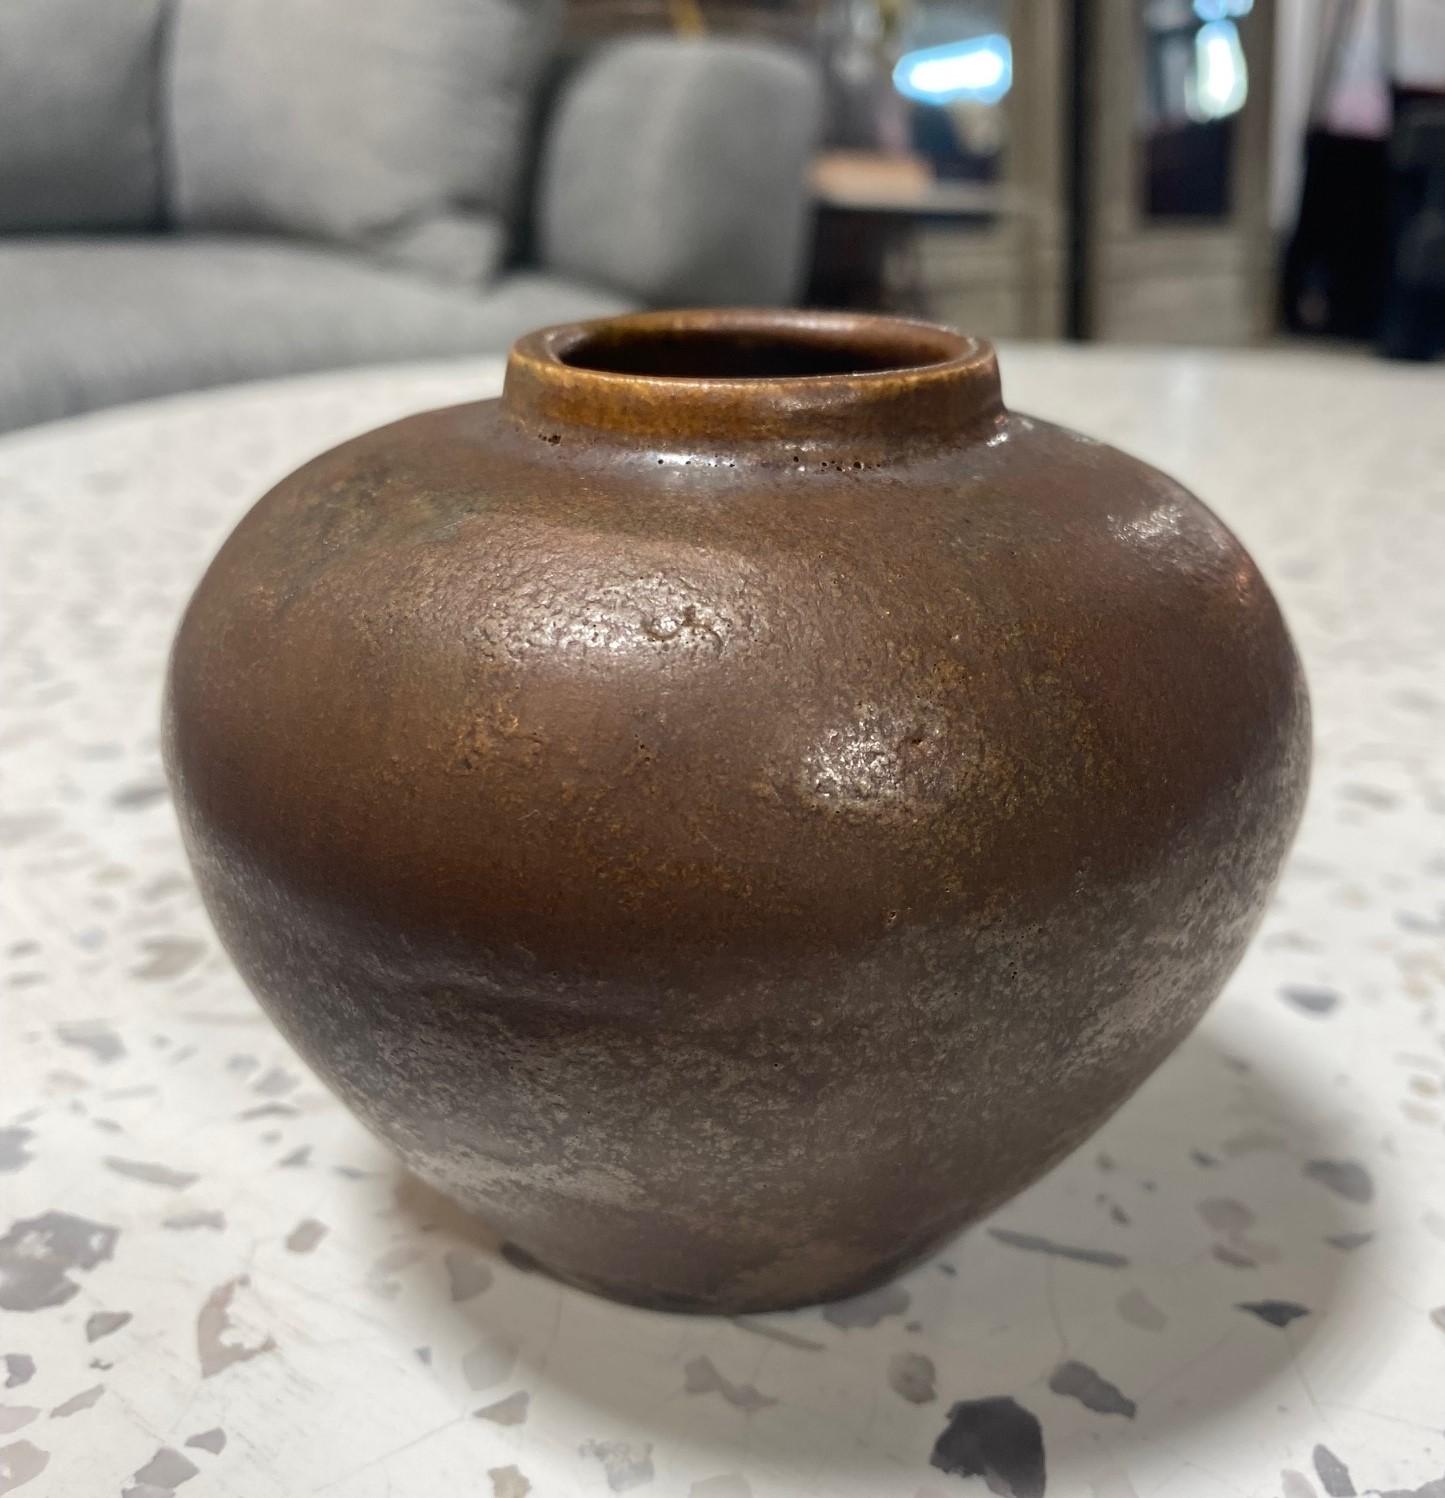 A very rare early work featuring a dark chocolate brown glaze by master Mid-Century Modern ceramist/potter Glen Lukens whose work has become quite collectible and relatively scarce and difficult to find.

The work is signed and dated (1924) by